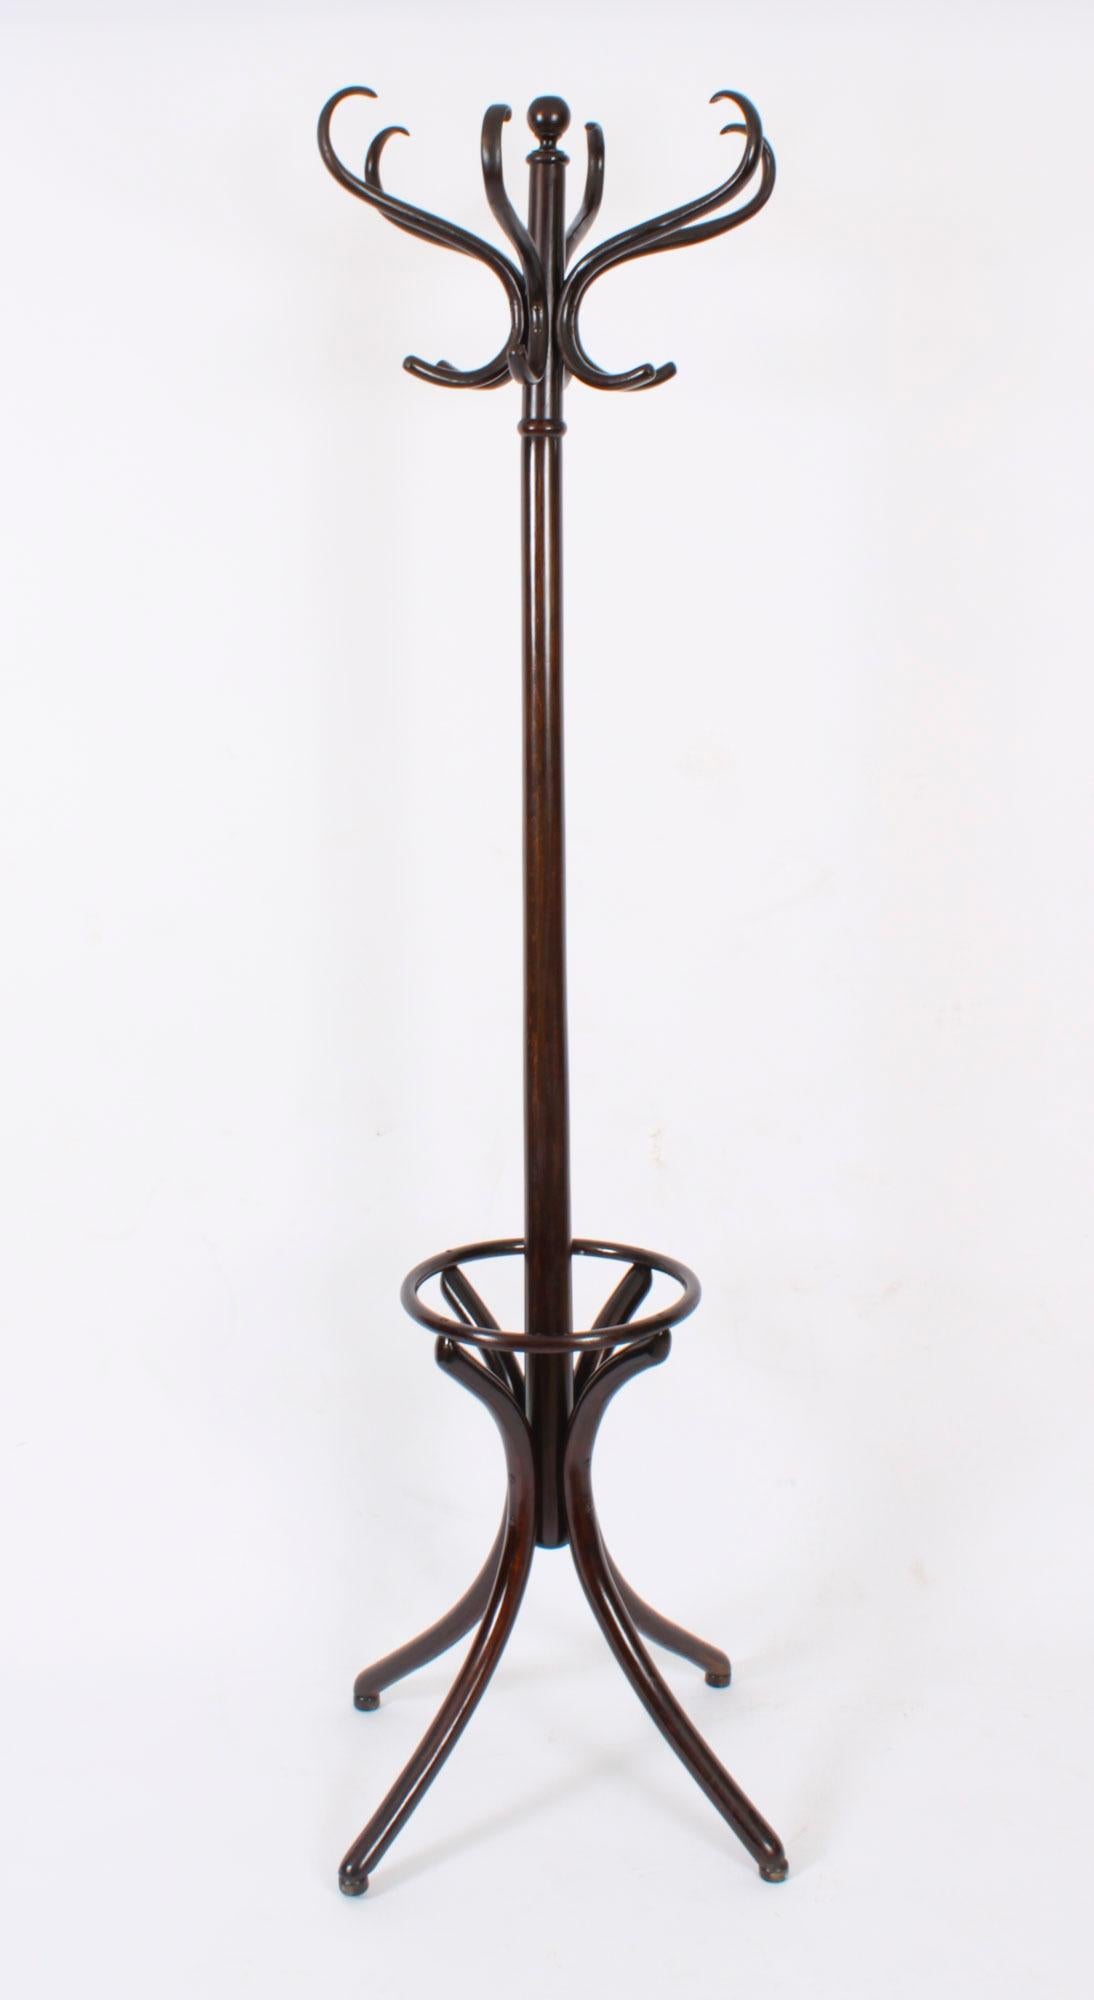 An excellent antique free standing bentwood stained beech coat, hat and stick stand, attributed to Thonet, circa 1890 in date.

It features a central pillaster complete for six  cloaks or hats and a lower rack for sticks and umbrellas.

It is a